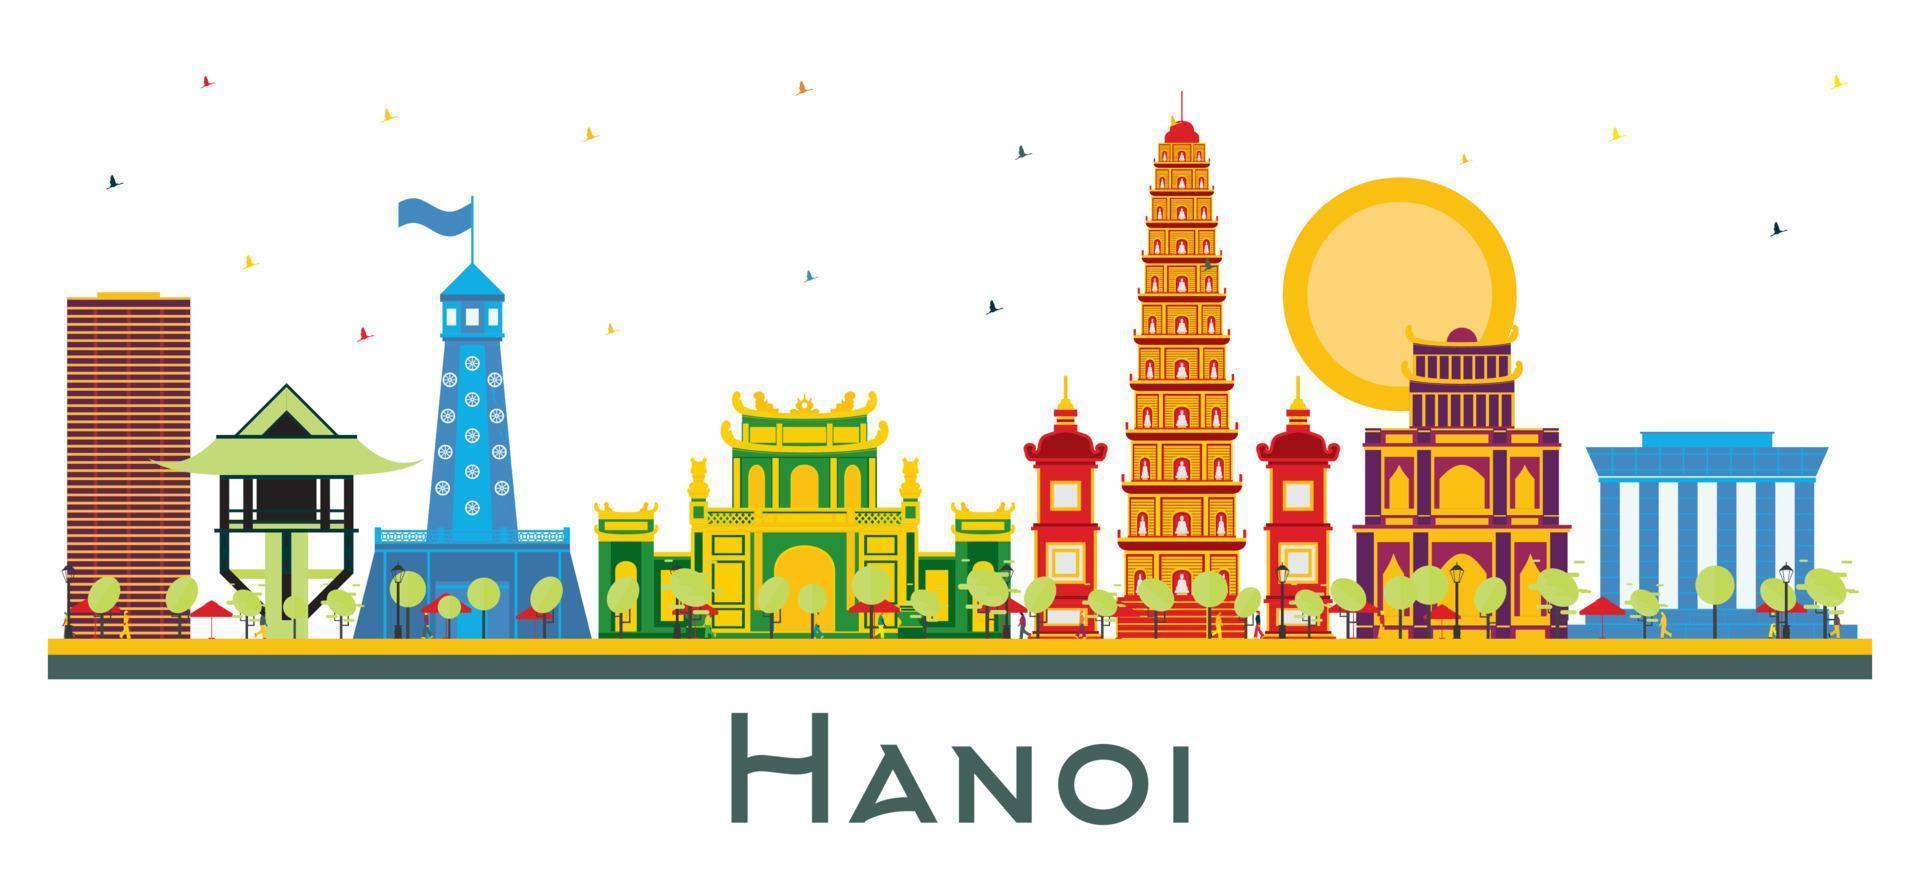 Hanoi Vietnam City Skyline with Color Buildings Isolated on White. vector